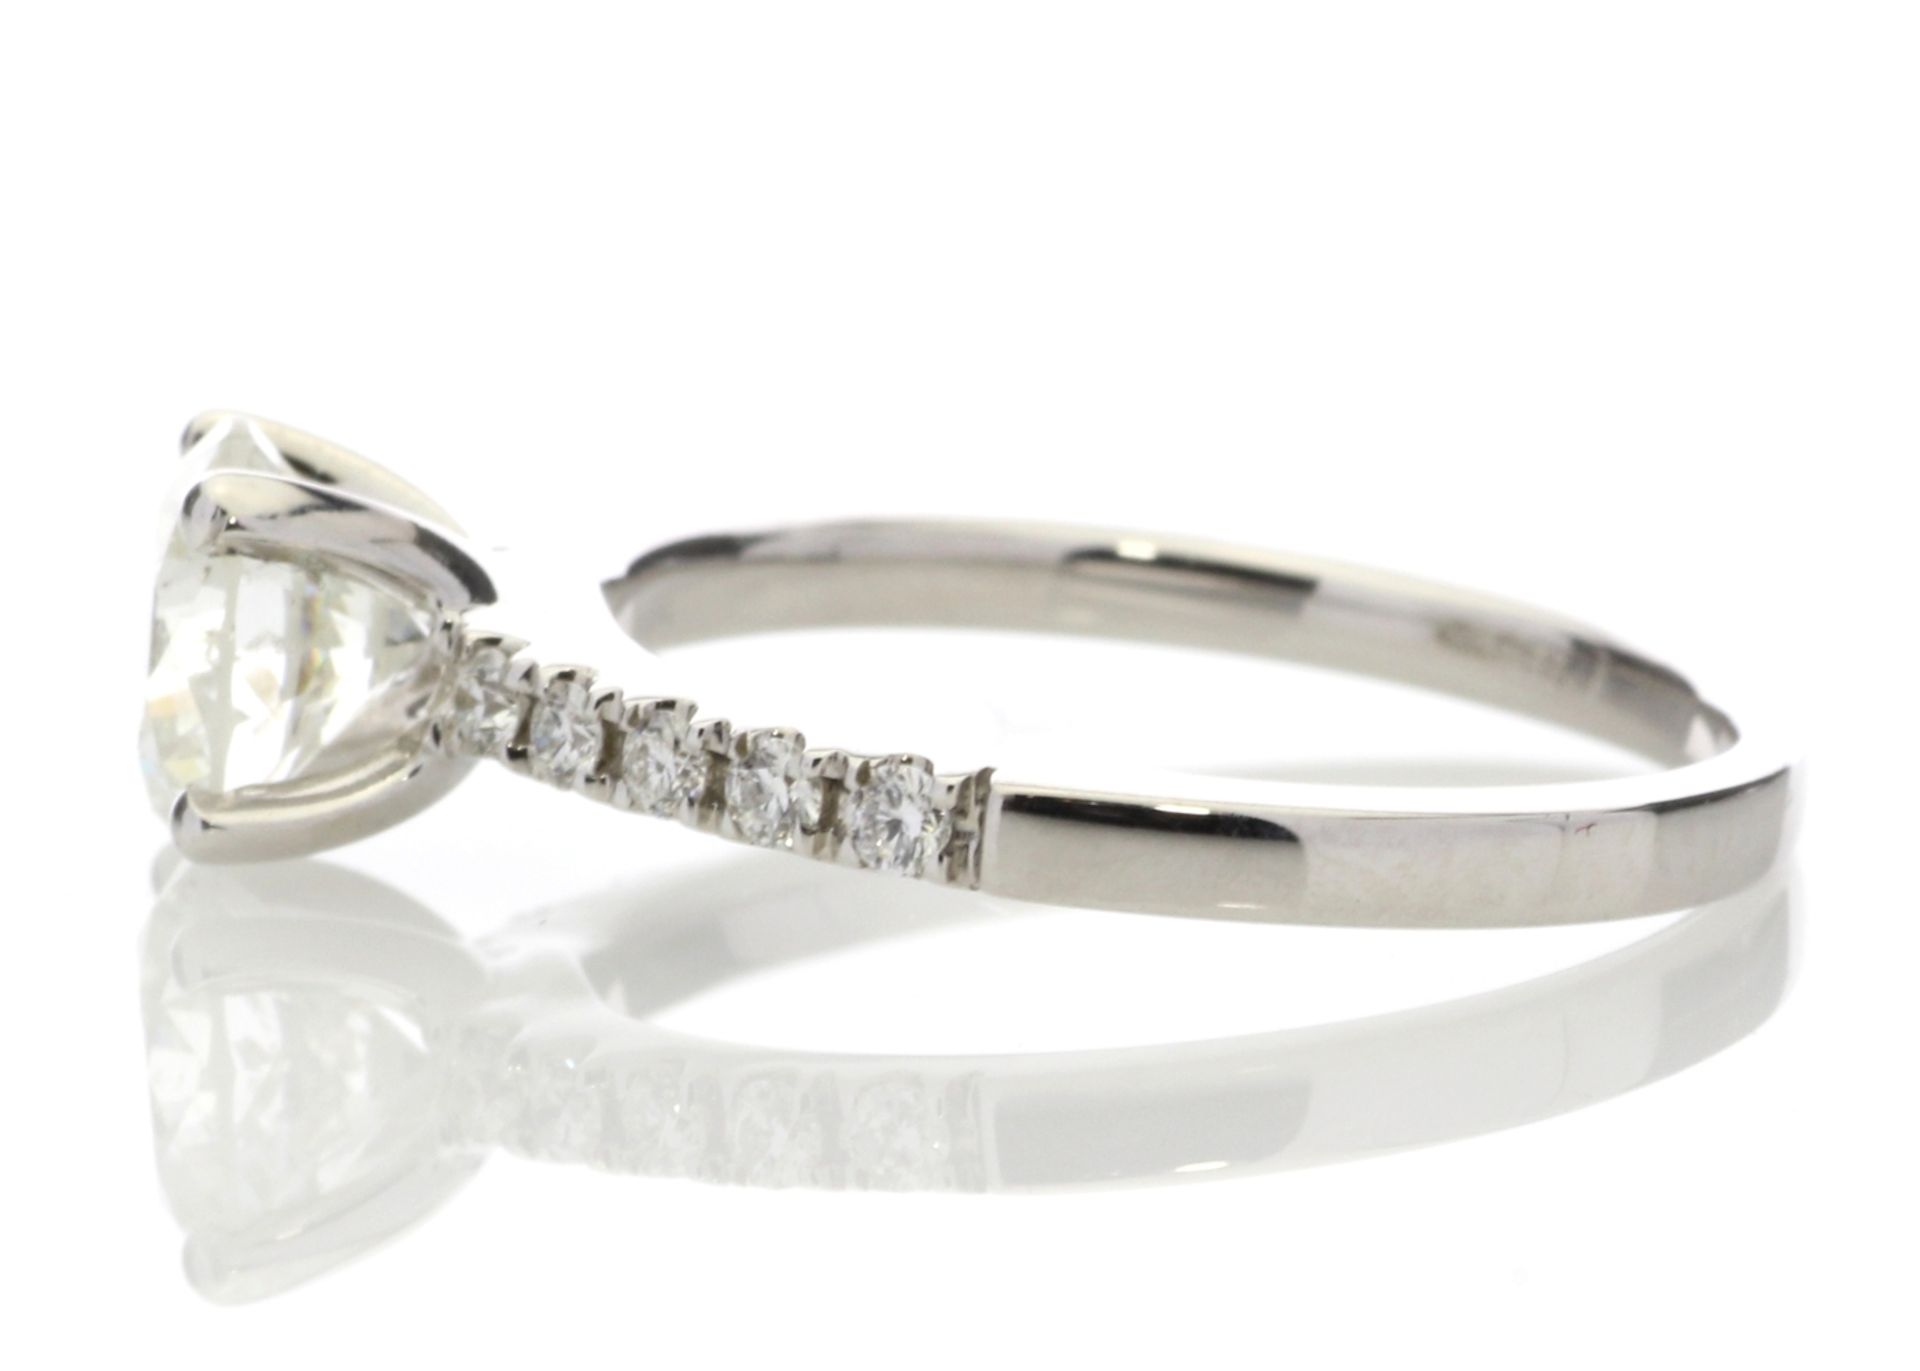 18ct White Gold Single Stone Diamond Ring With Stone Set Shoulders (1.07) 1.25 Carats - Image 3 of 5